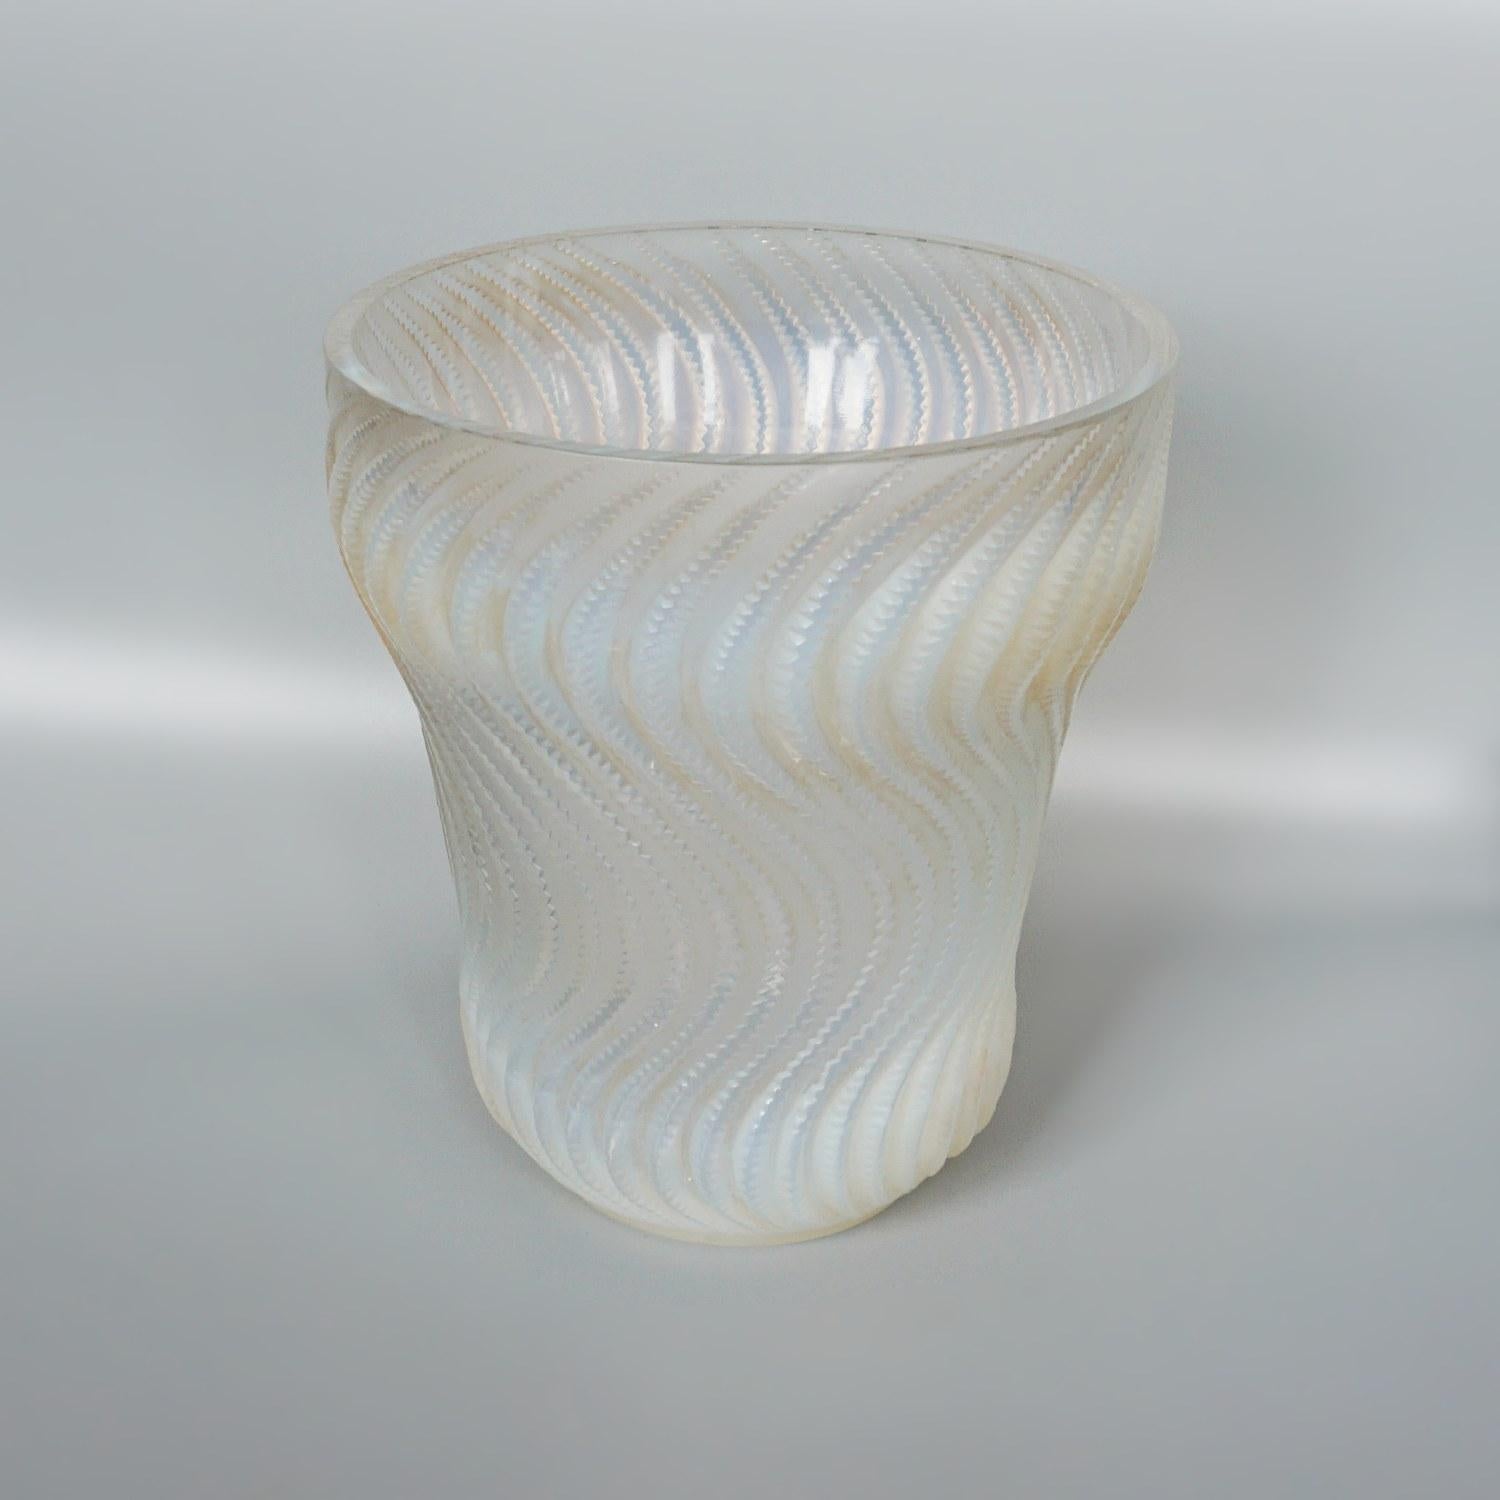 'Actinia' an Opalescent Glass Vase by René Lalique, Circa 1935 In Excellent Condition For Sale In Forest Row, East Sussex